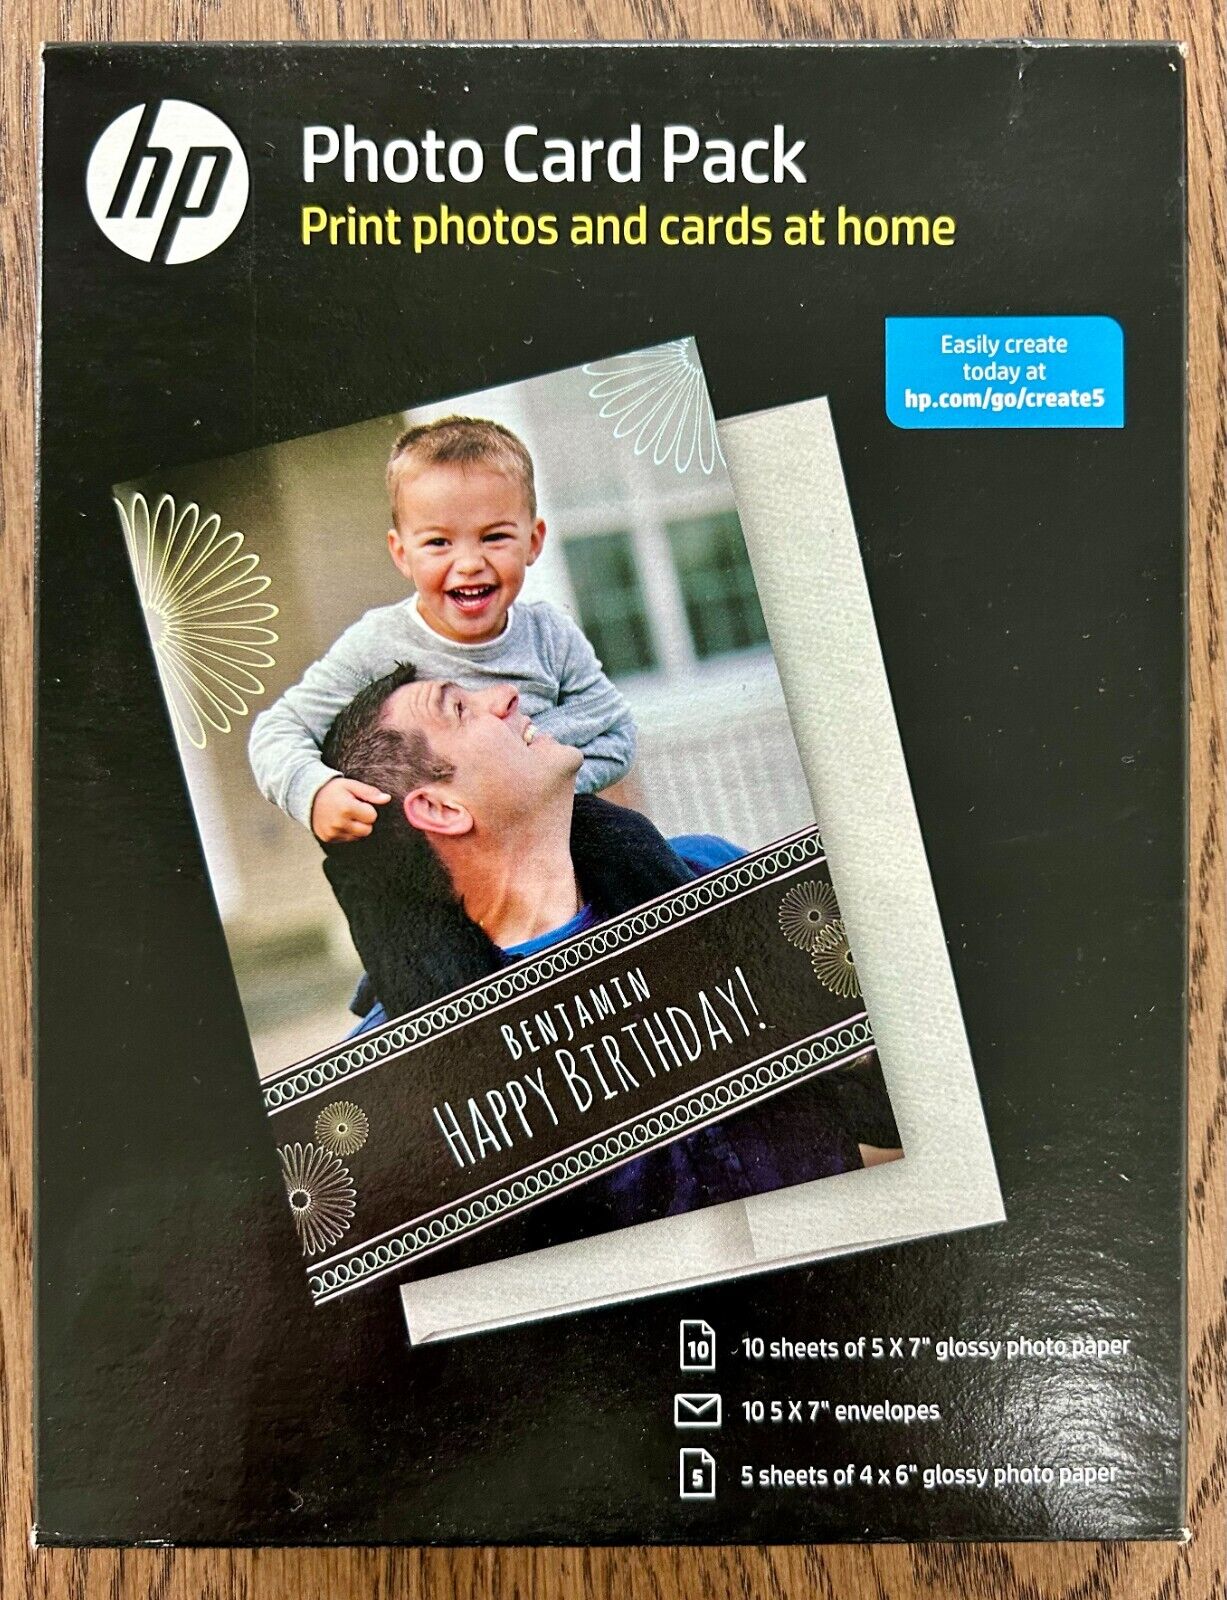 New HP Photo Card Pack 5x7 Paper w/ Envelopes (10) 4x6 Paper (5) SF791A Glossy